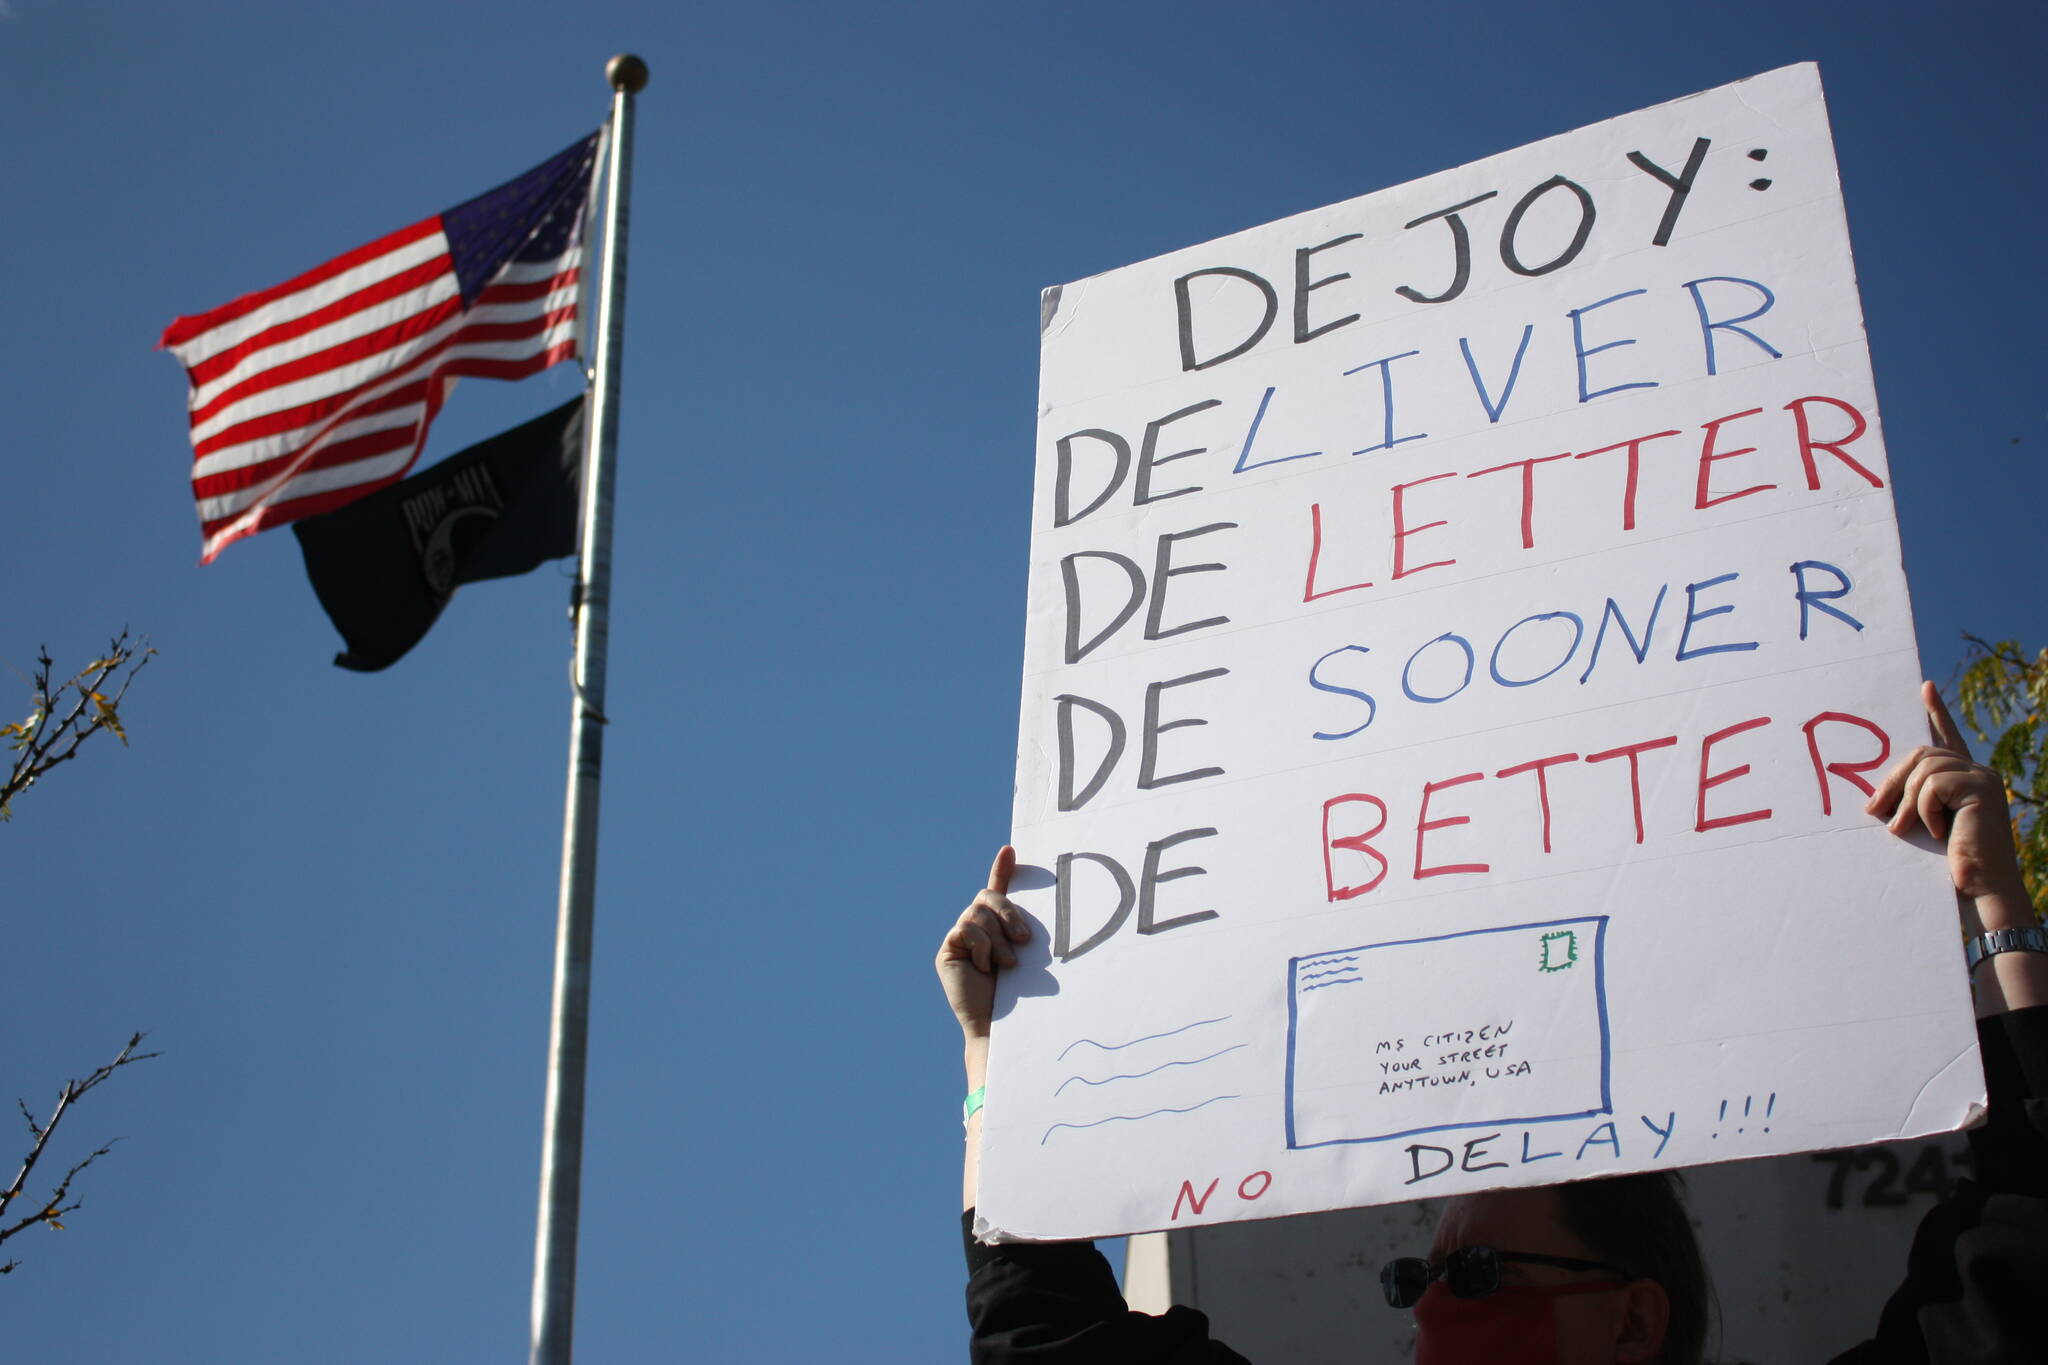 Postal worker hold sign criticizing Postmaster Louis DeJoy (photo credit: Cameron Sheppard)